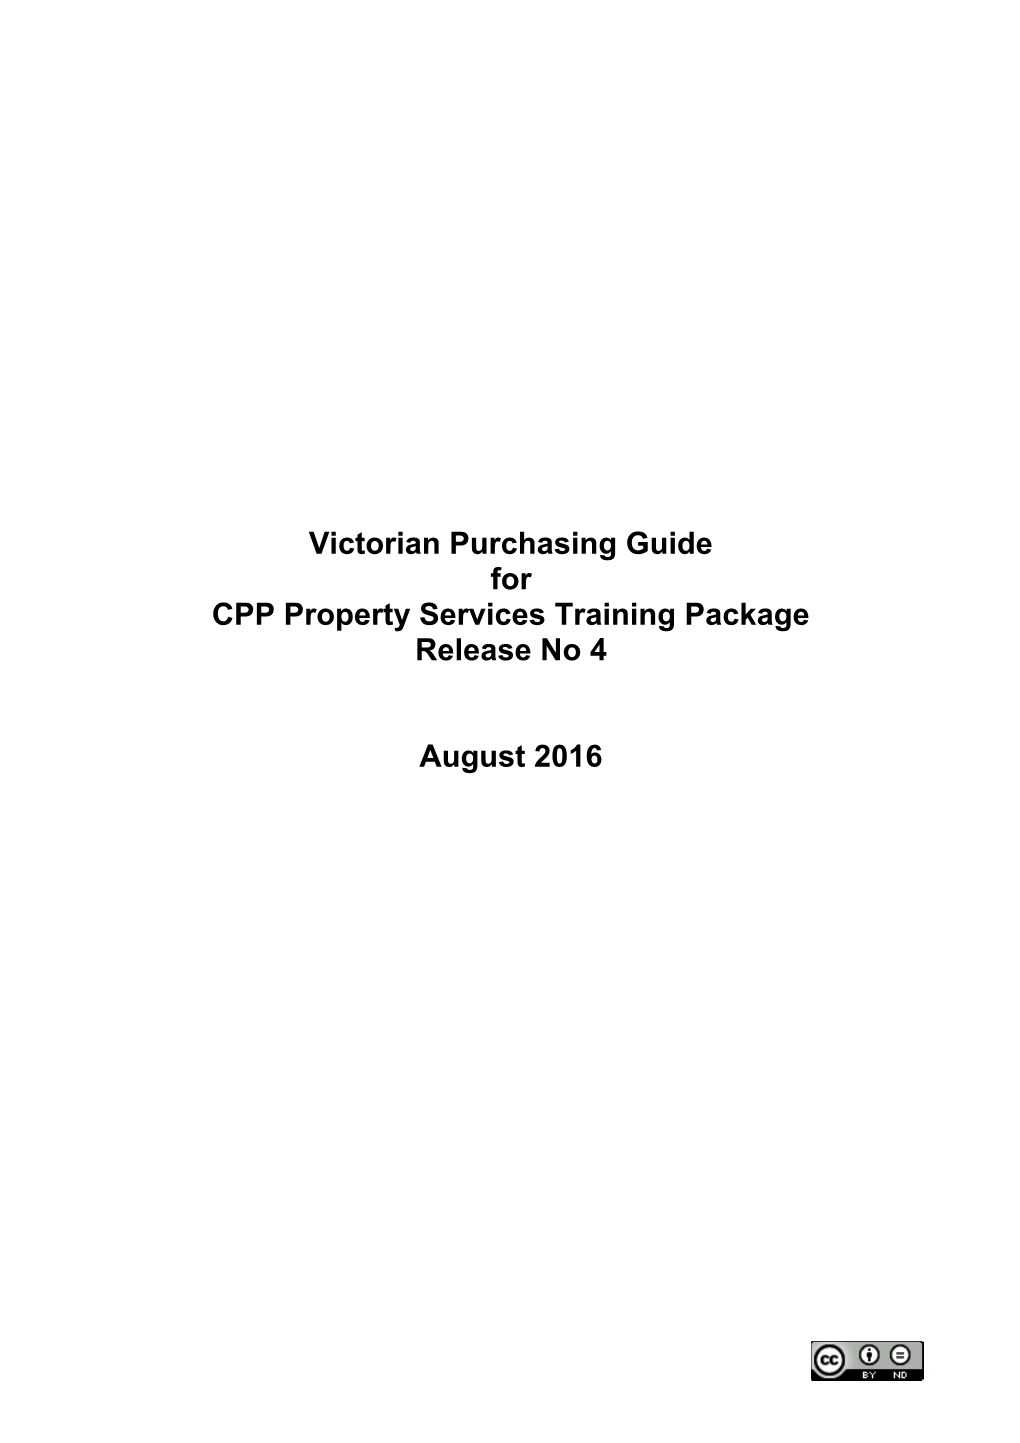 Victorian Purchasing Guide for CPP Release 2